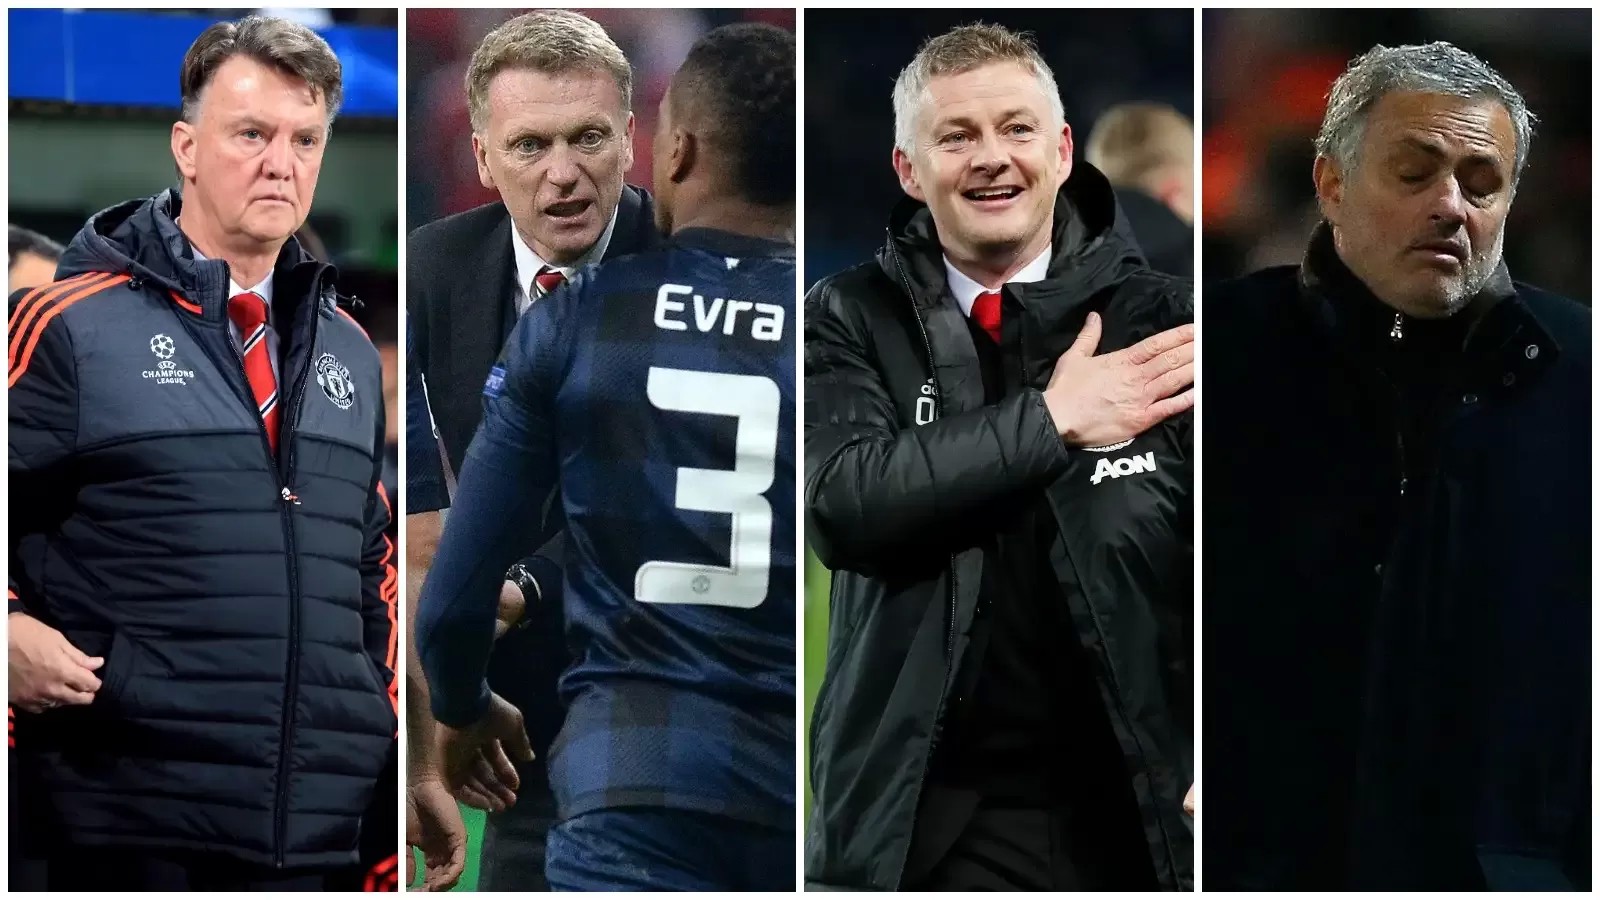 Man Utd’s dismal post-Fergie Champions League campaigns ranked for wretchedness